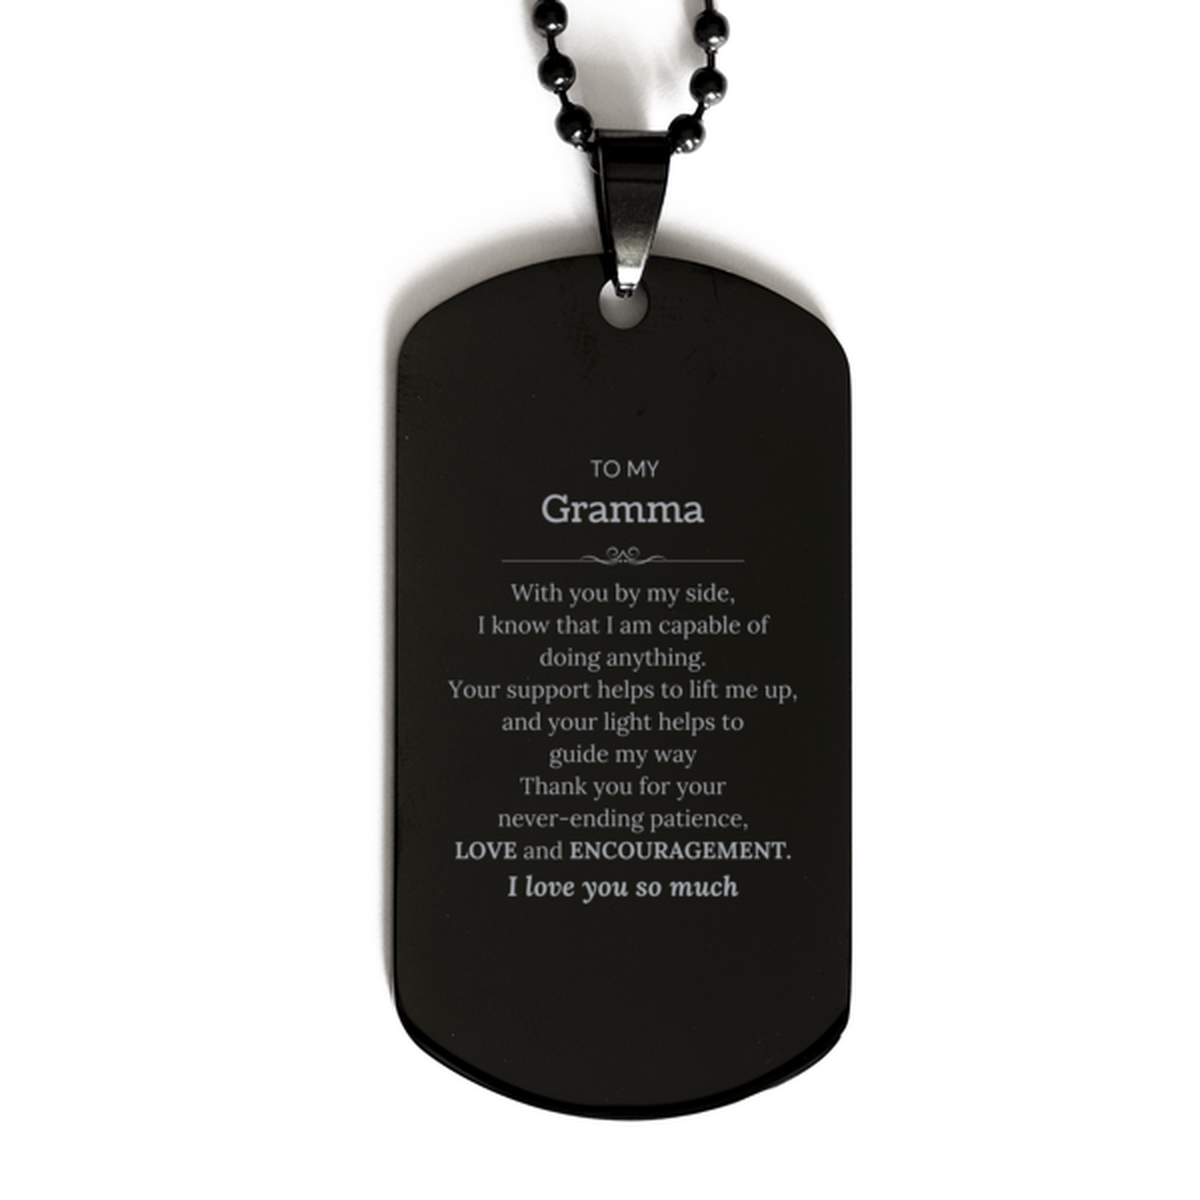 Appreciation Gramma Black Dog Tag Gifts, To My Gramma Birthday Christmas Wedding Keepsake Gifts for Gramma With you by my side, I know that I am capable of doing anything. I love you so much